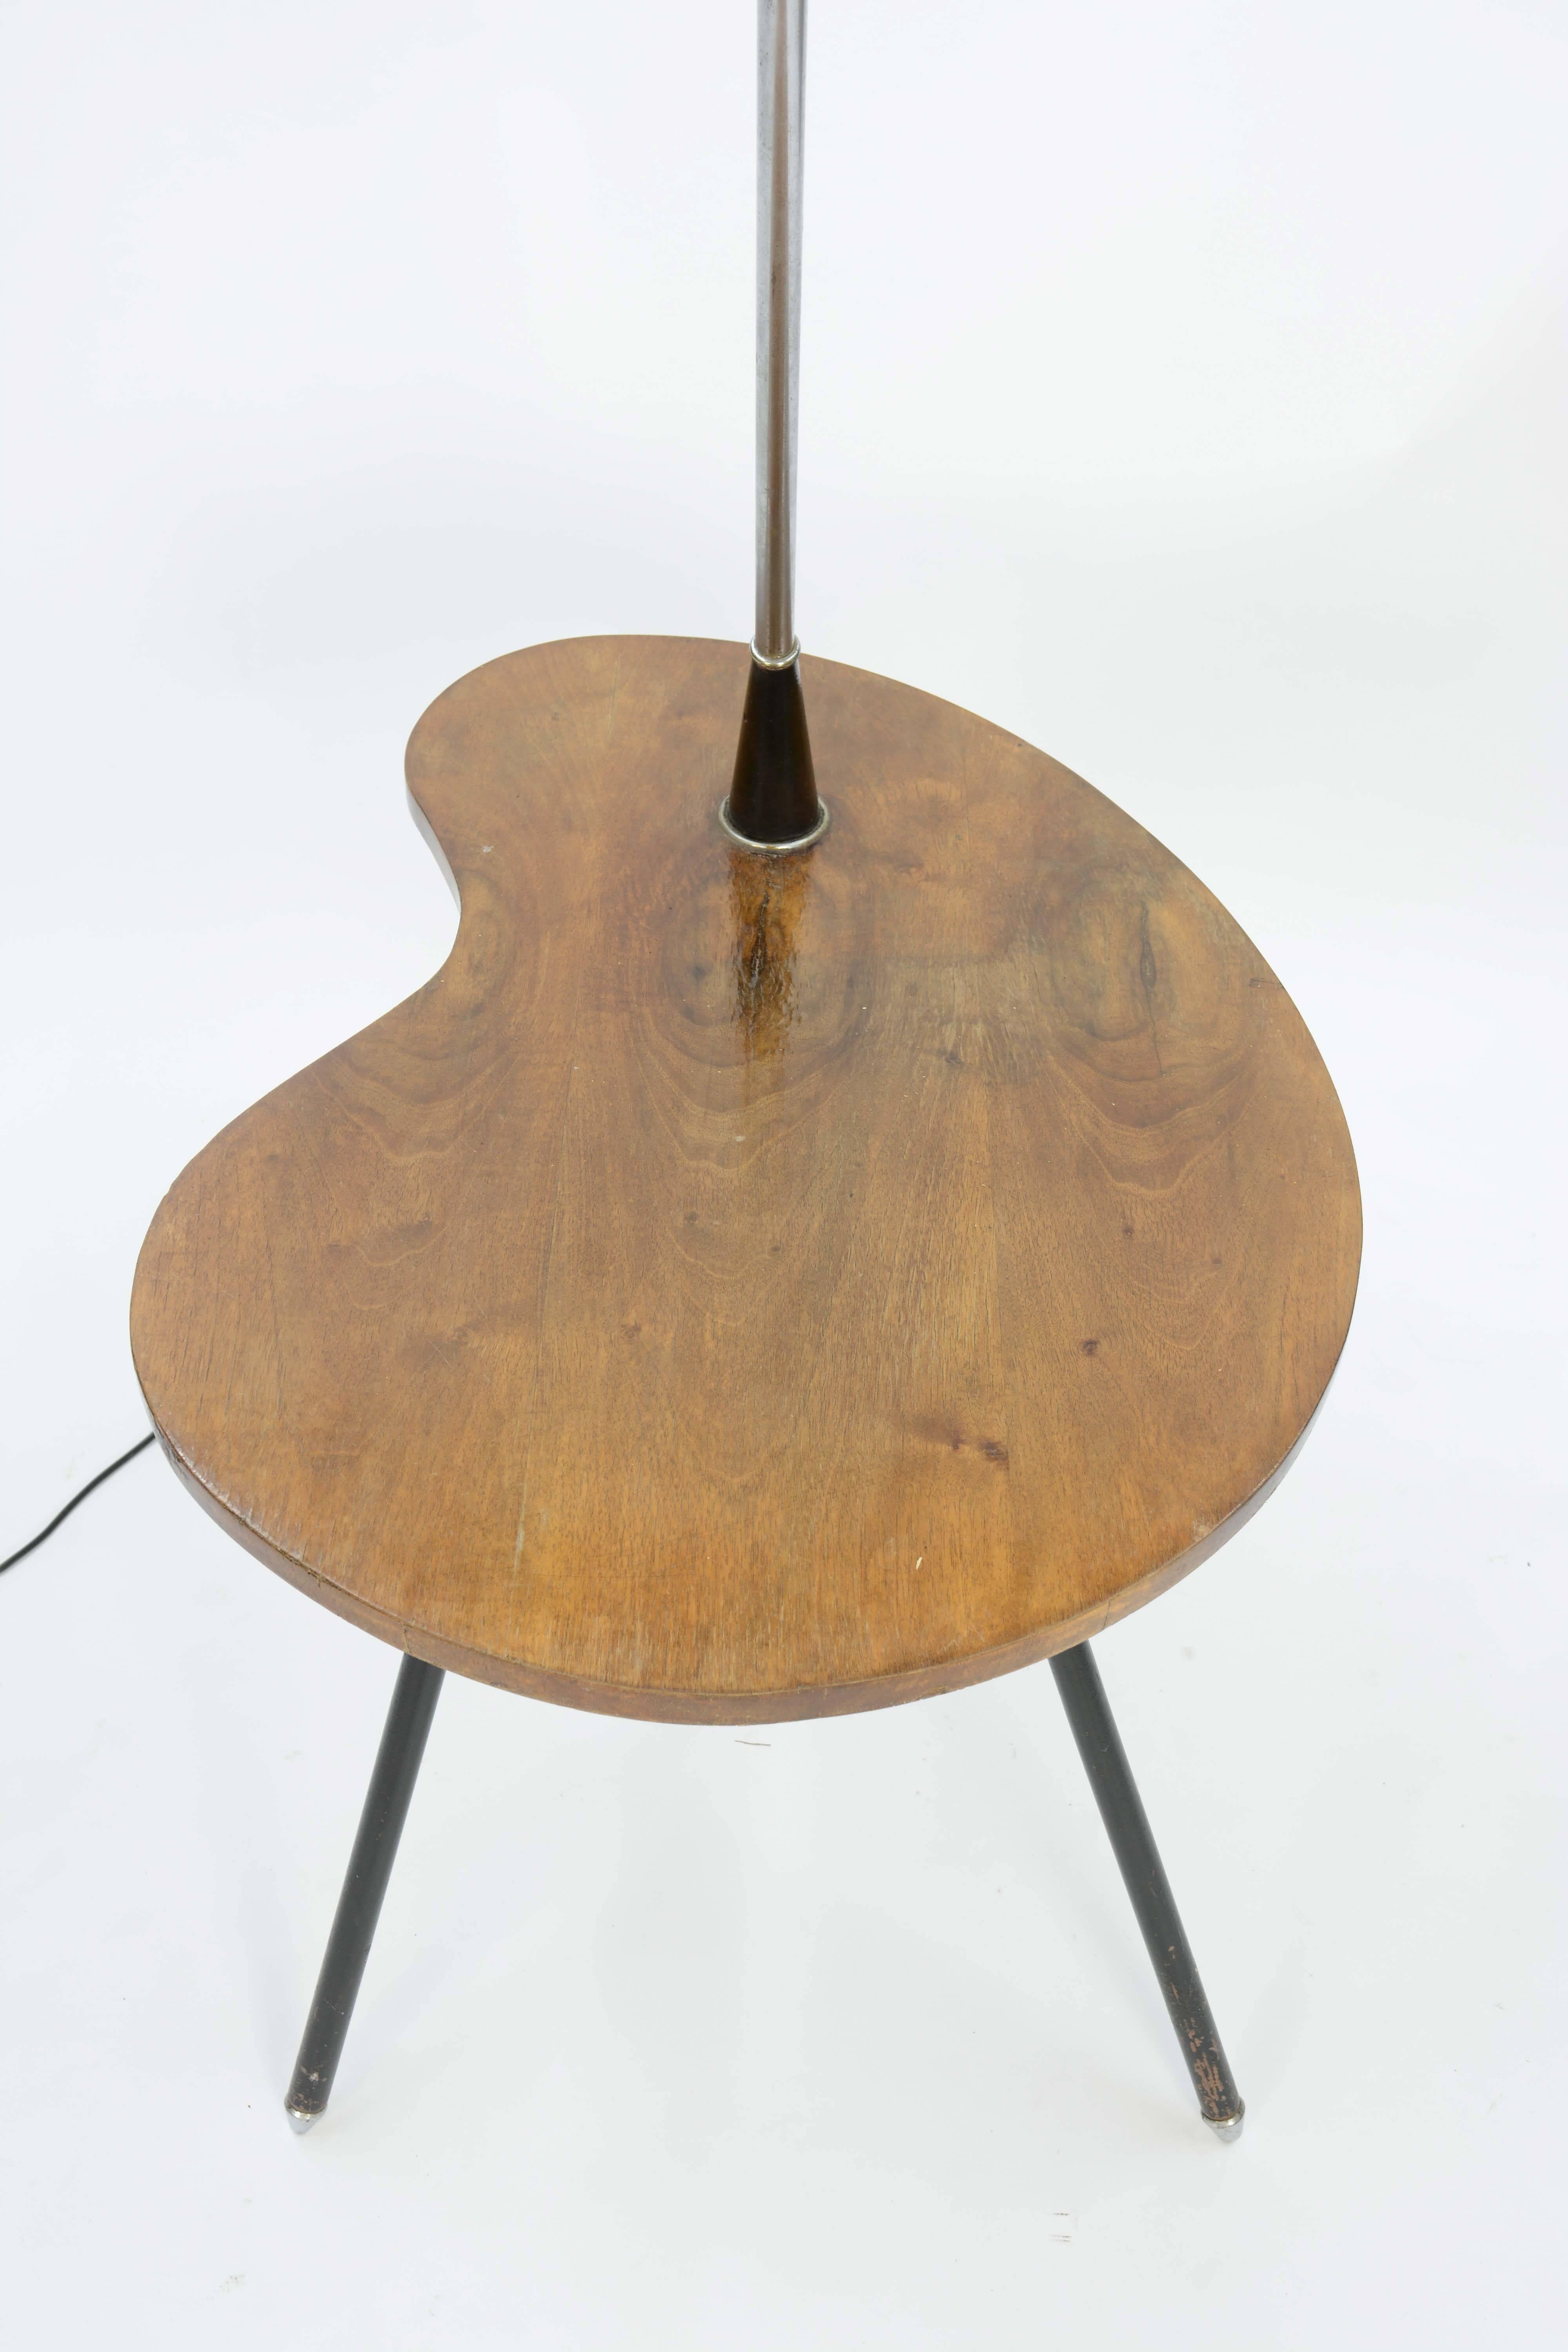 Mid-20th Century Extraordinary Cocktail Table Floor Lamp with Walnut Biomorphic, Tabletop